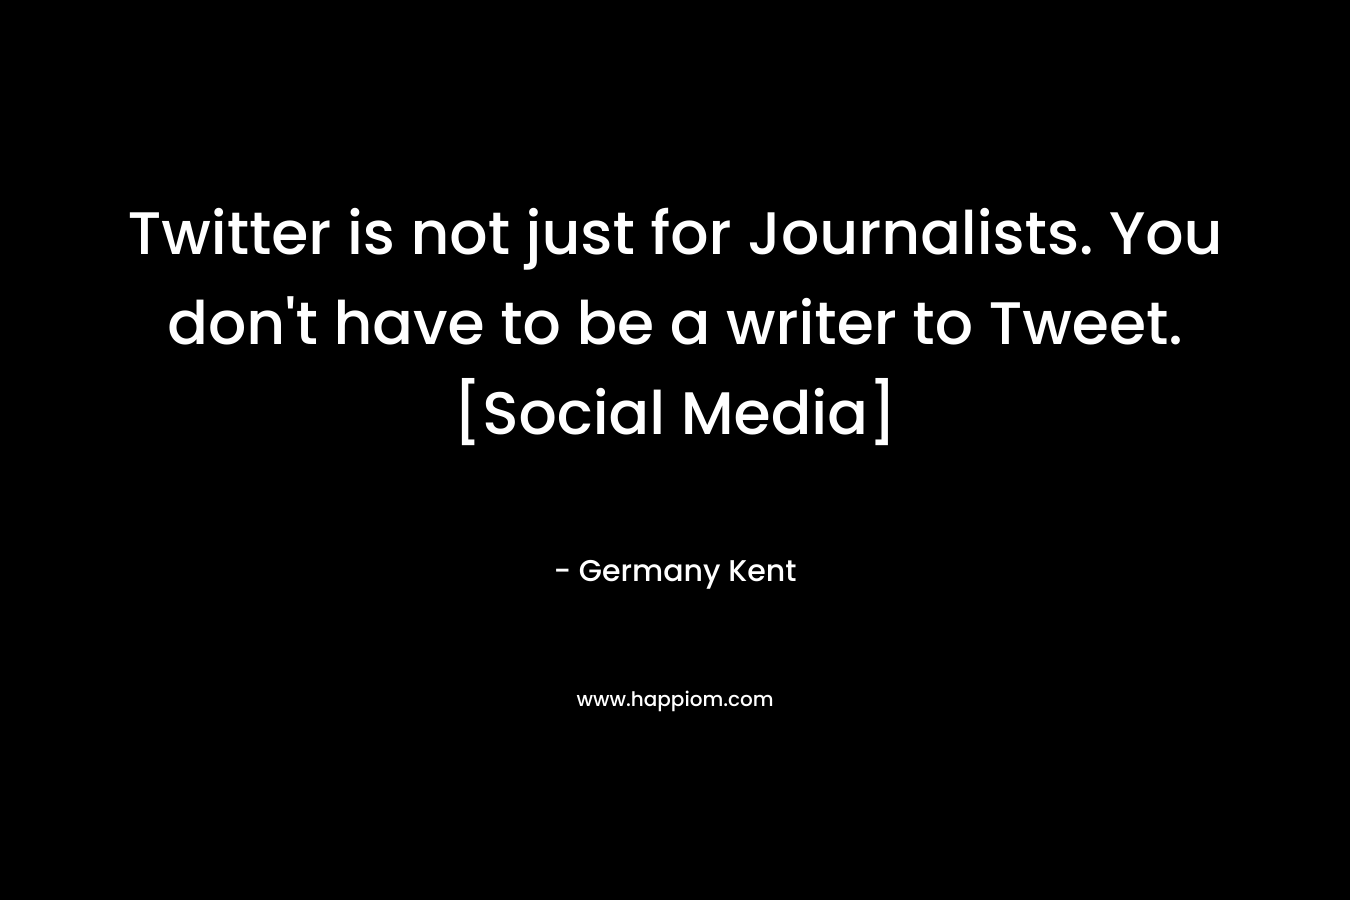 Twitter is not just for Journalists. You don't have to be a writer to Tweet.[Social Media]